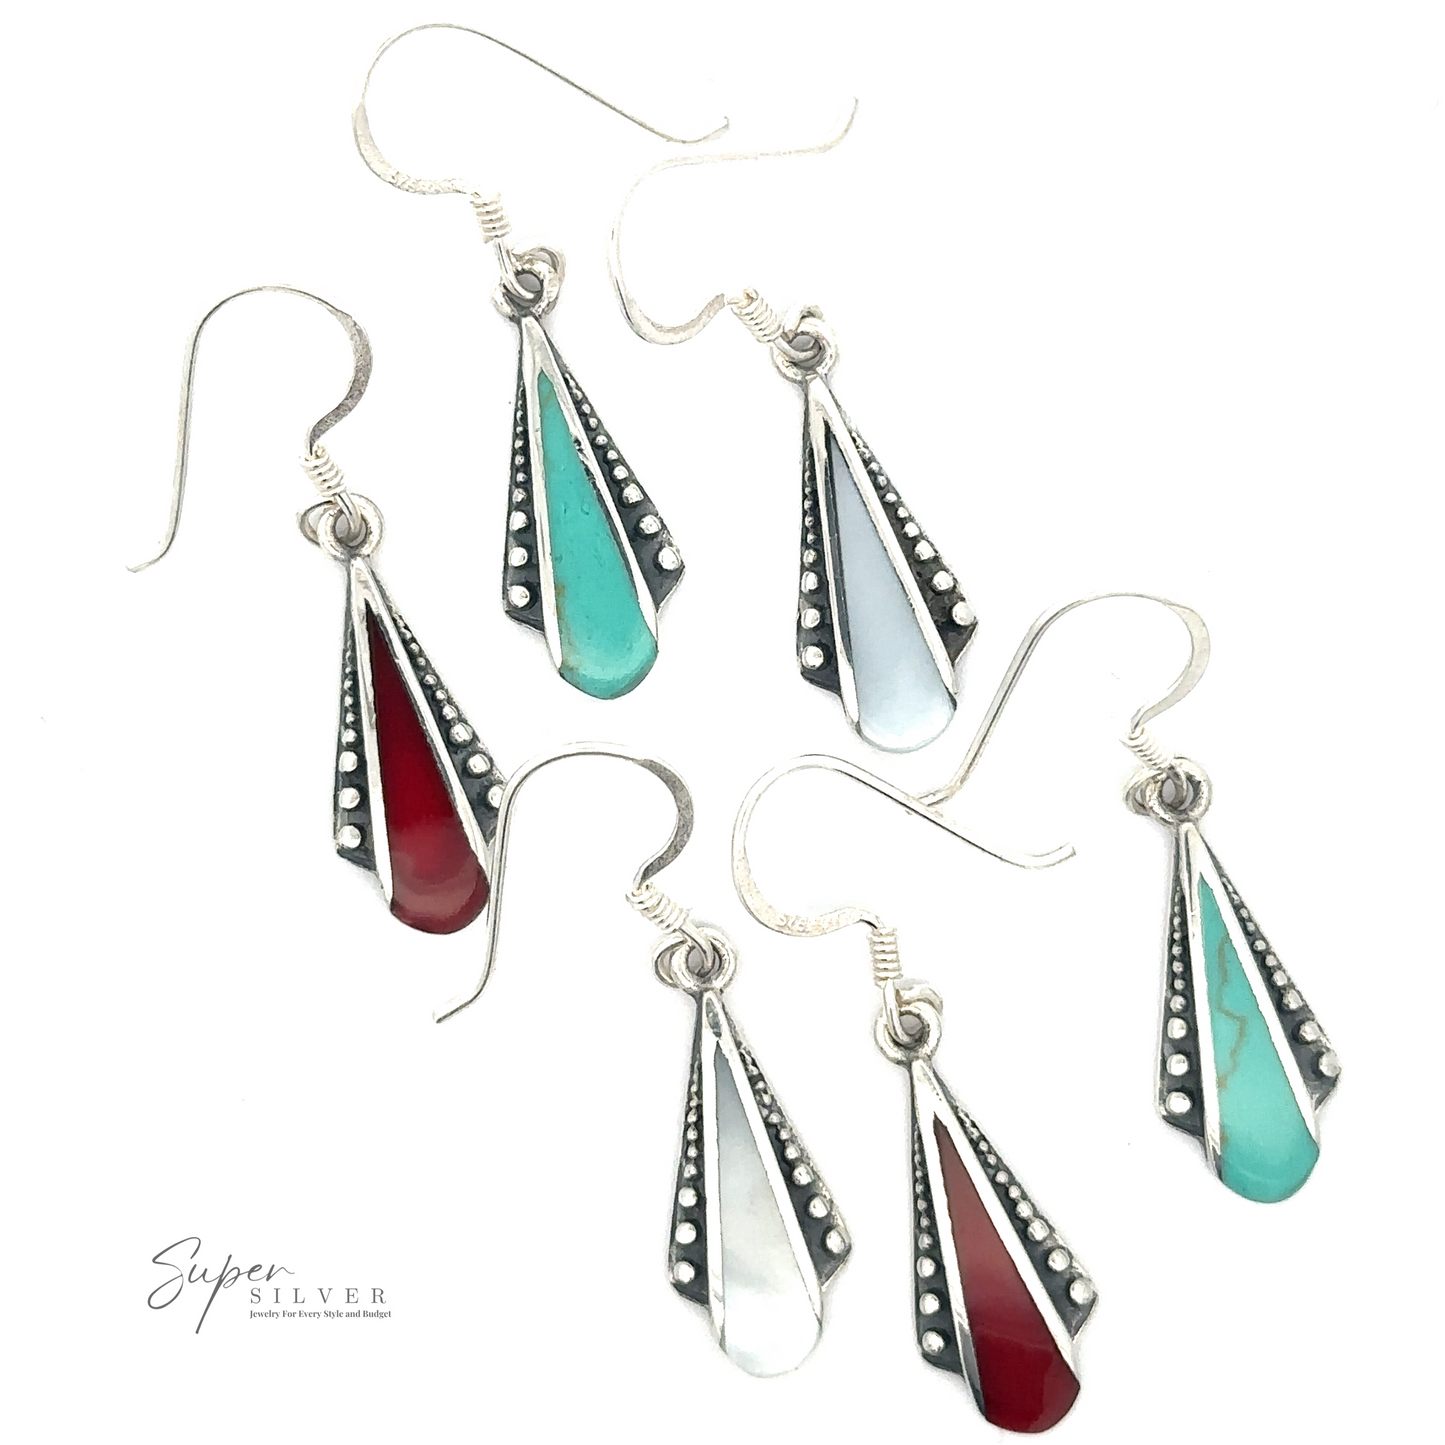 Three pairs of Inlaid Teardrop Shaped Bali Inspired Earrings, each boasting a teardrop-shaped gemstone. One pair dazzles with red stones, another with turquoise stones, and the third features Mother of Pearl. The Bali inspired earrings have a sterling silver hook design.